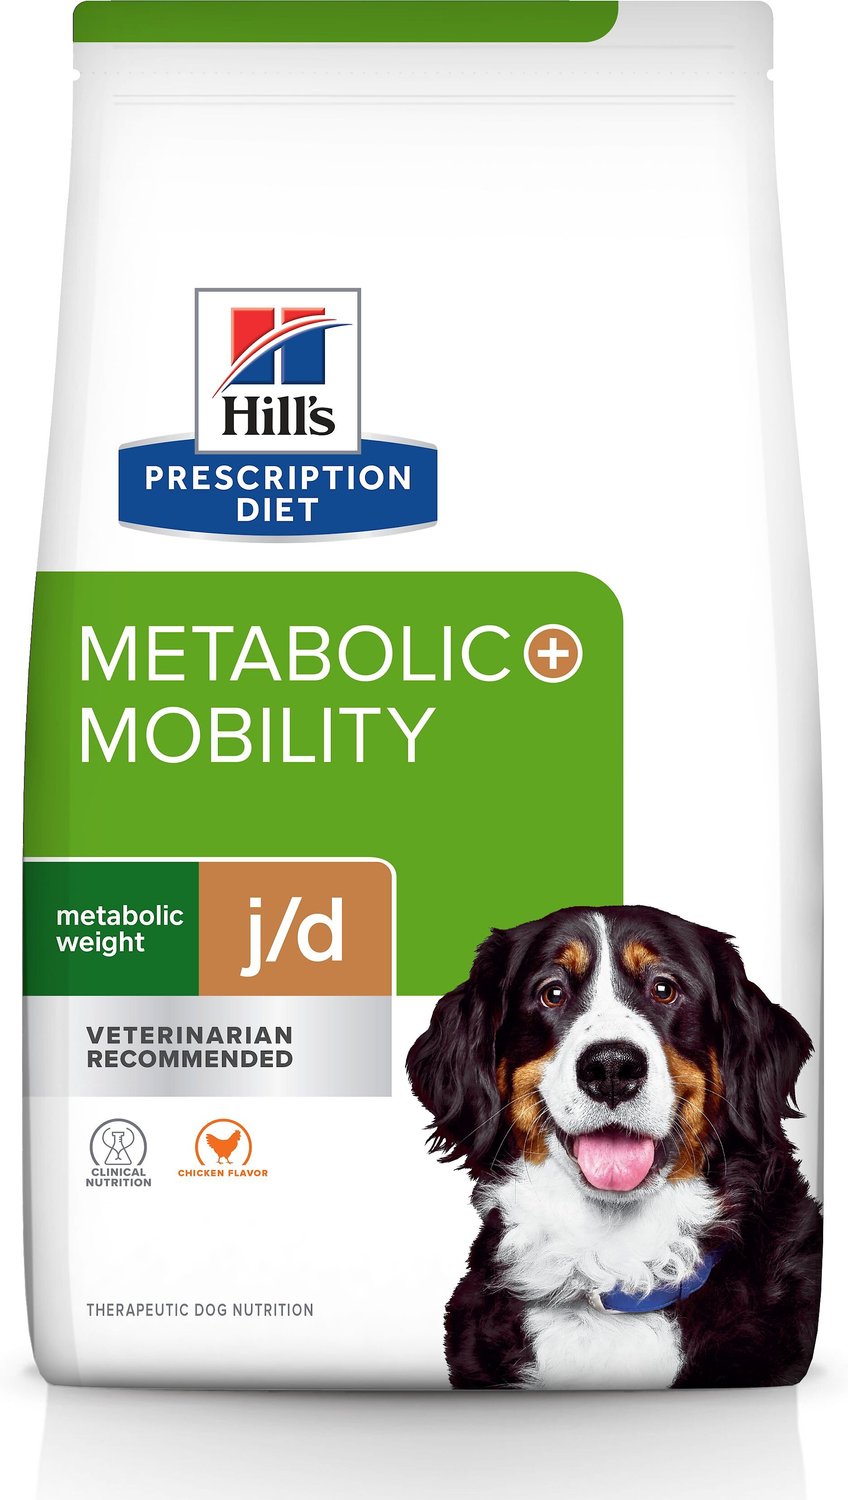 Hill's Prescription Diet Metabolic + Mobility Chicken Flavor Dry Dog Food